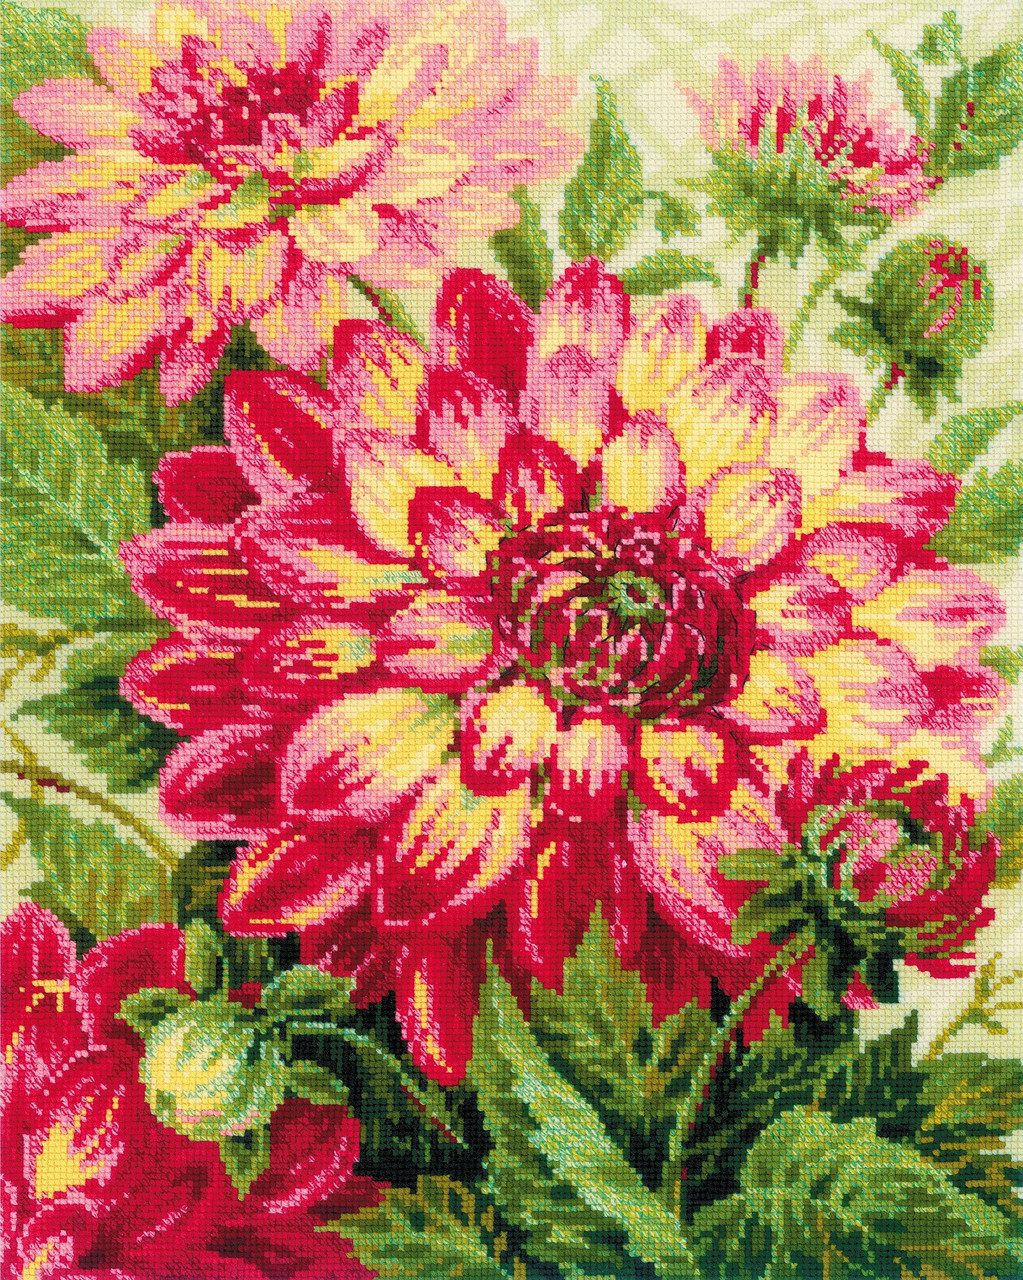 10 Count R1056 RIOLIS Counted Cross Stitch Kit 9.75"X19.75"-Sunflowers 